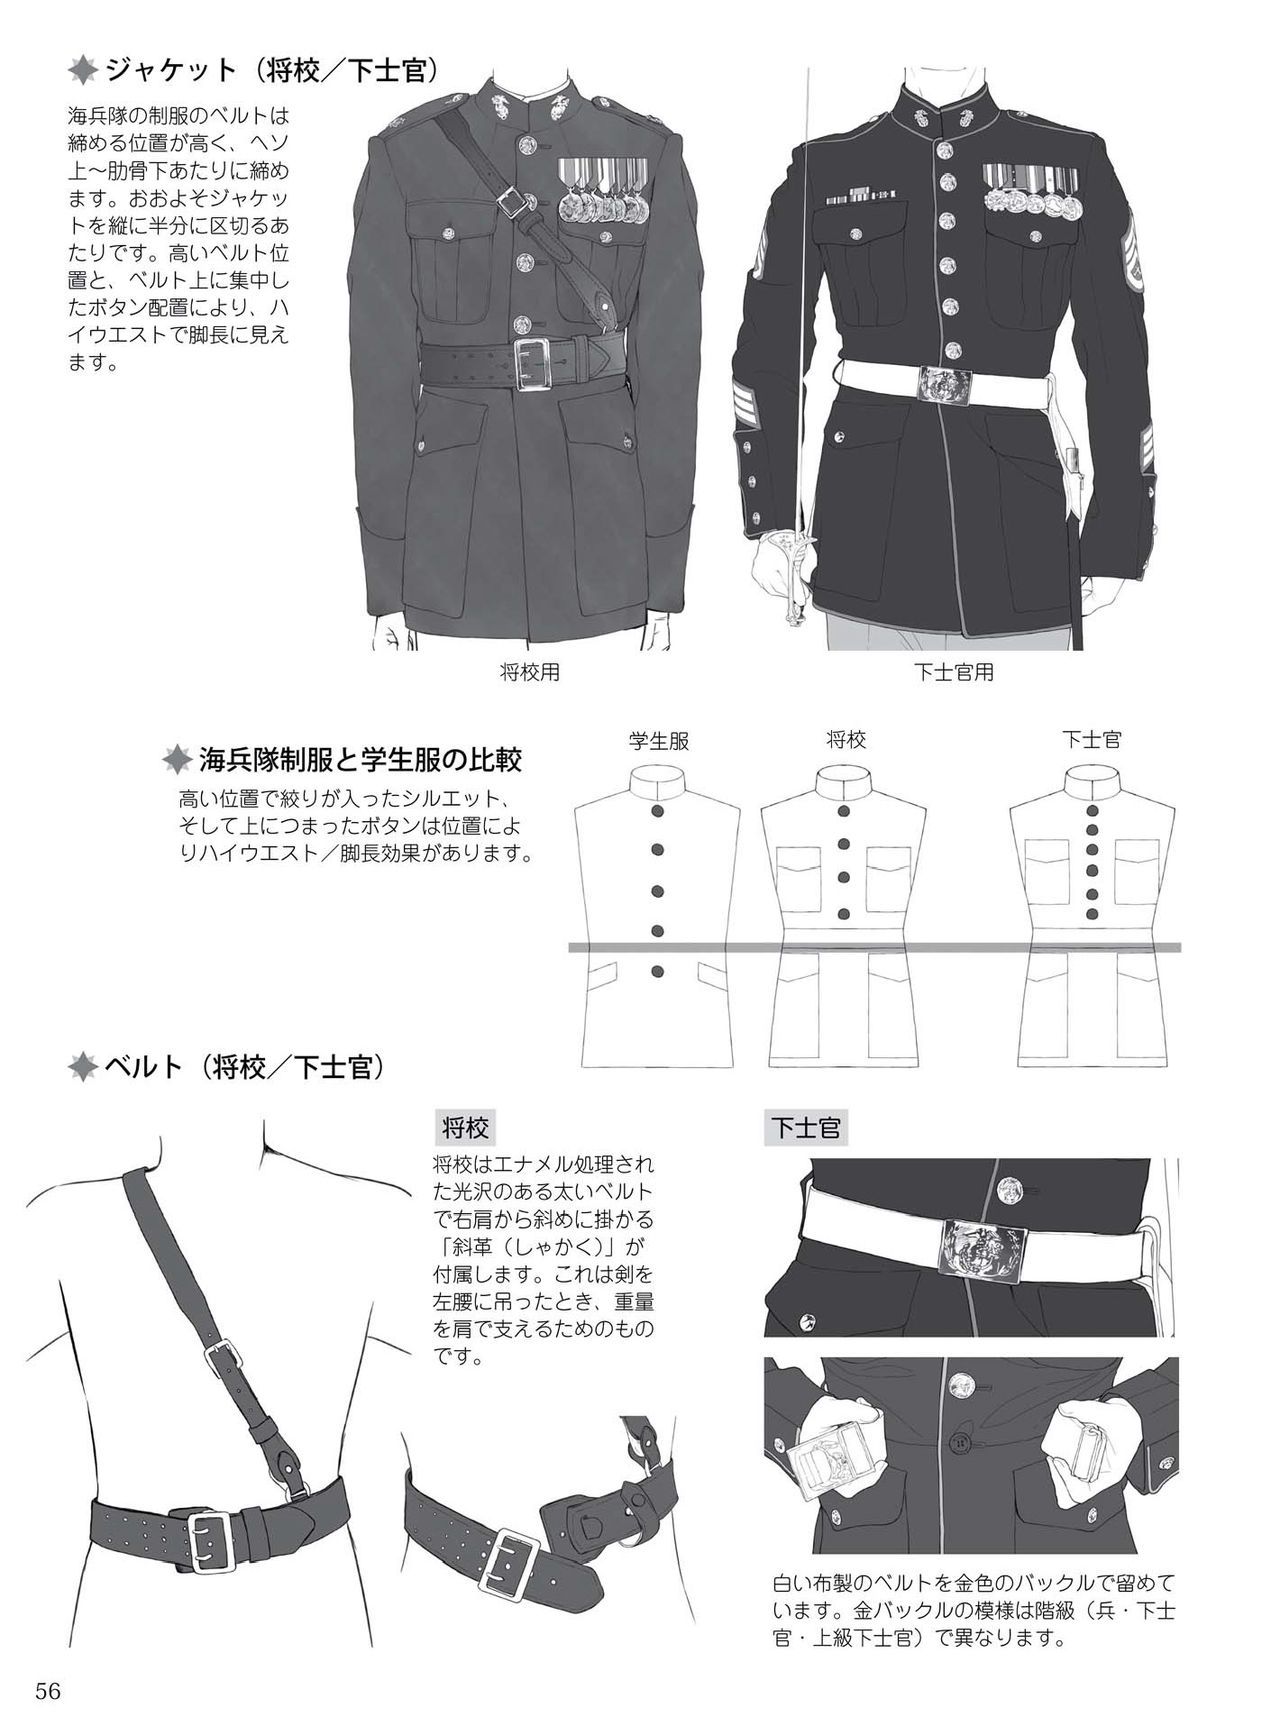 How to draw military uniforms and uniforms From Self-Defense Forces 軍服・制服の描き方 アメリカ軍・自衛隊の制服から戦闘服まで 59